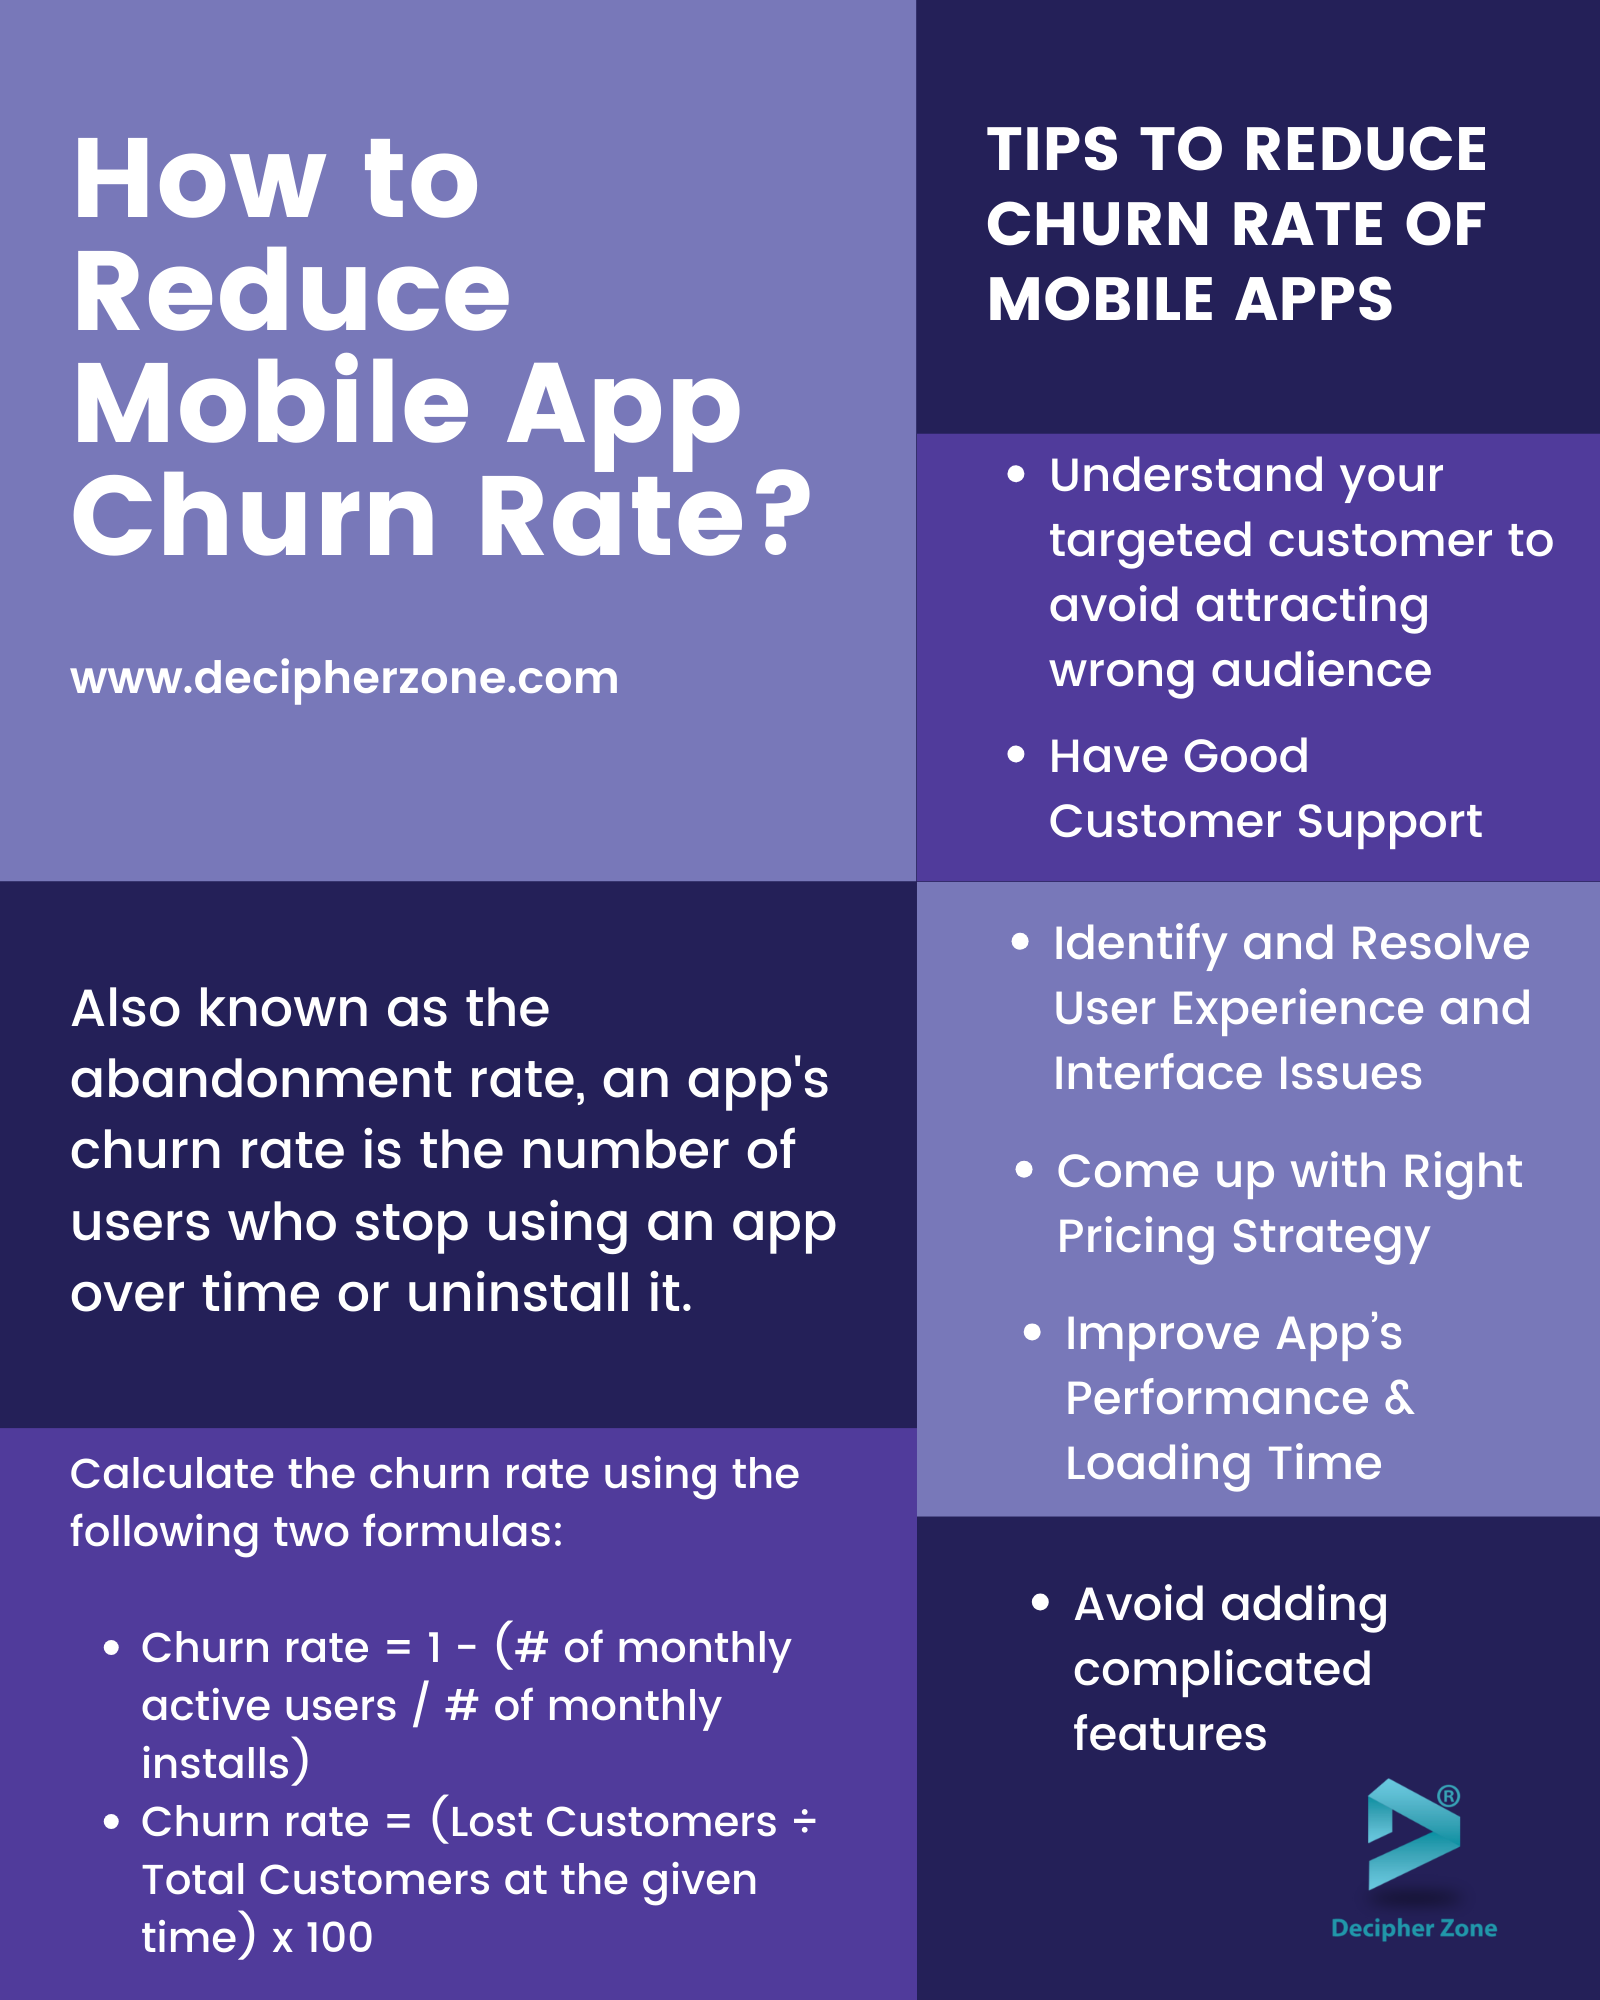 How to Reduce Your Mobile App Churn Rate?